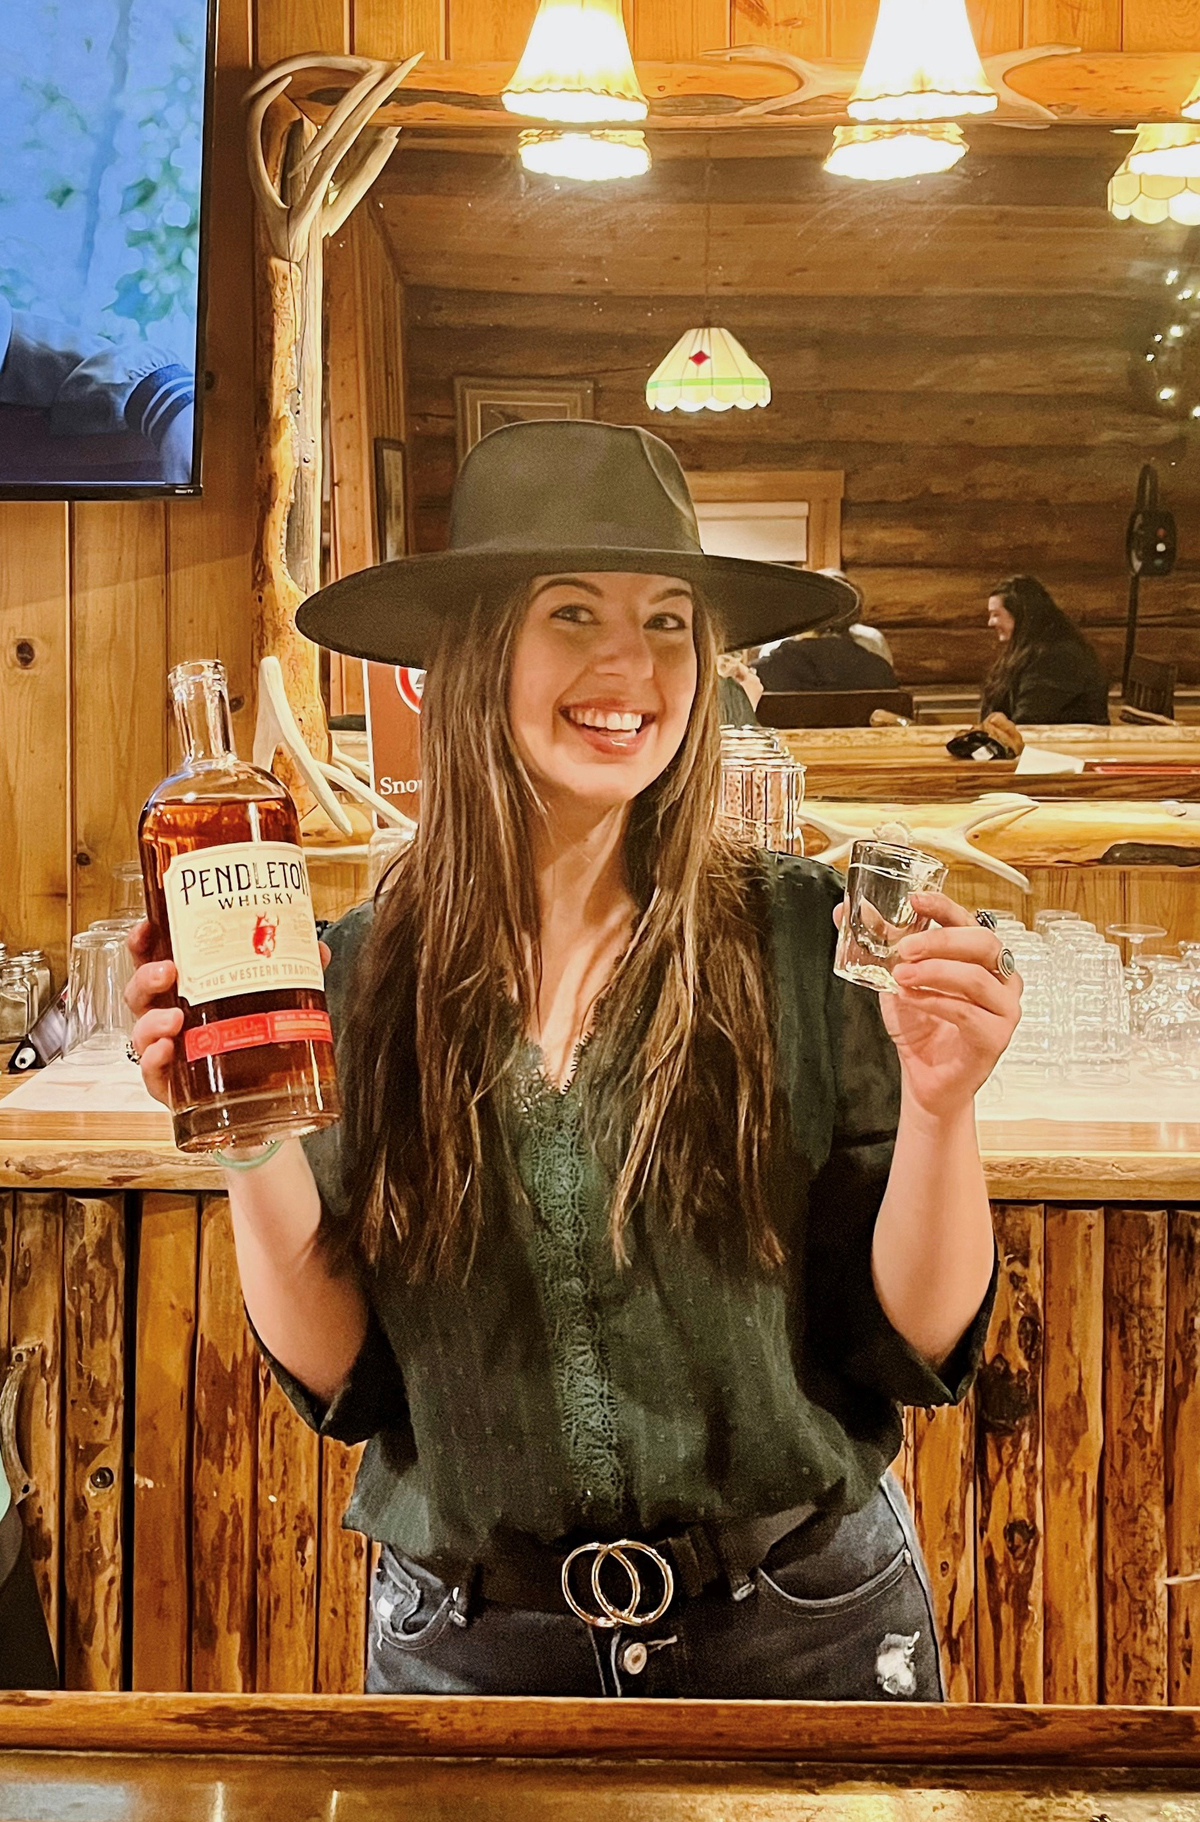 The onsite Cowboy Bar at Brooks Lake Lodge is the best place to belly up for top drinks and a convivial après atmosphere at the remote Wyoming guest ranch where casual luxury meets the Wild West.